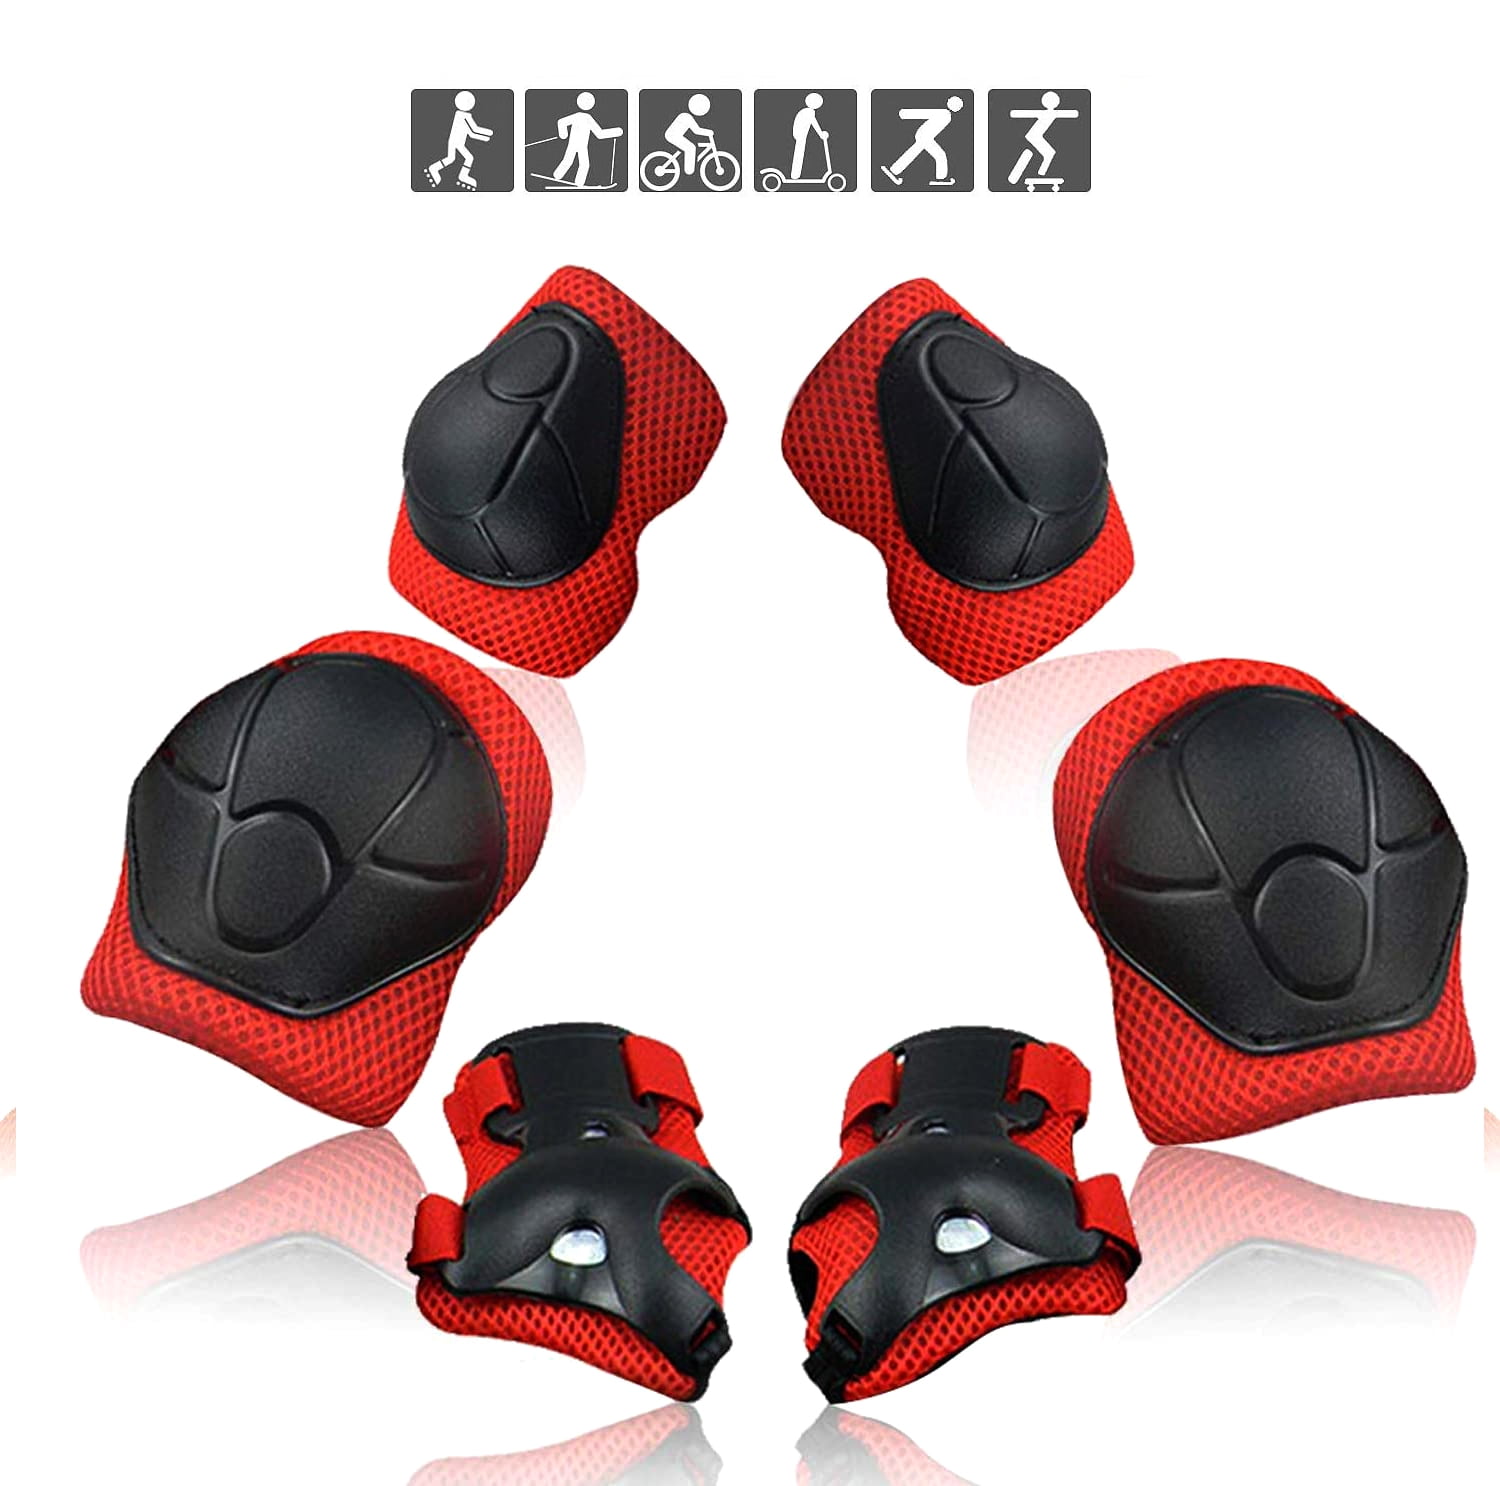 Kids Knee Pads Elbow Pads Wrist Guards, Children Toddler Breathable Protective Gear Set for Skateboard Rollerblading Inline Roller Skating Cycling Bike Scooter